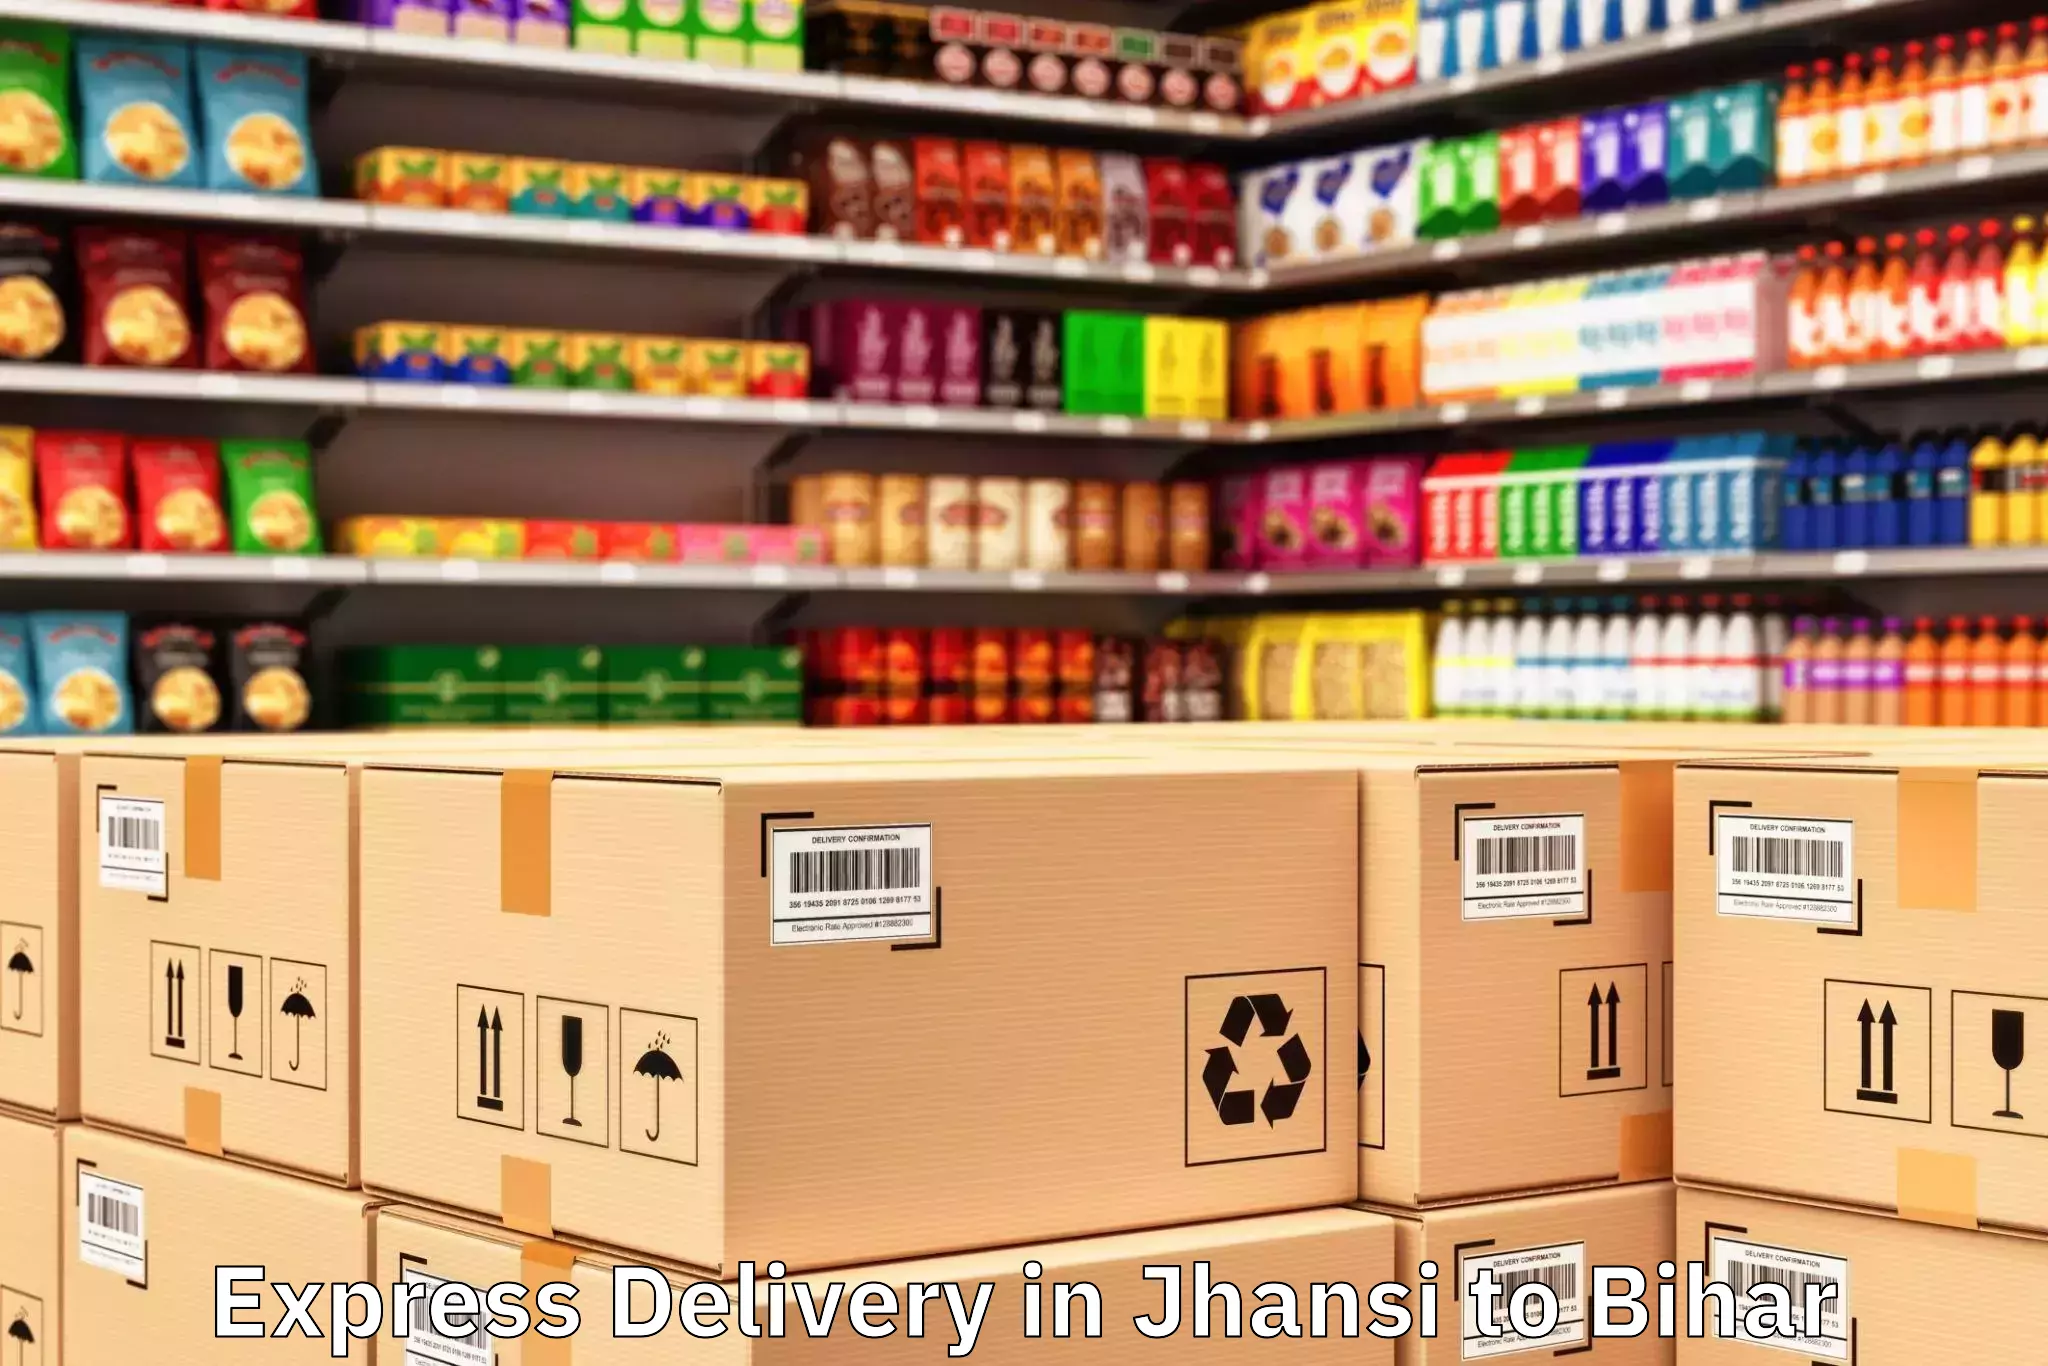 Professional Jhansi to Bihar Express Delivery